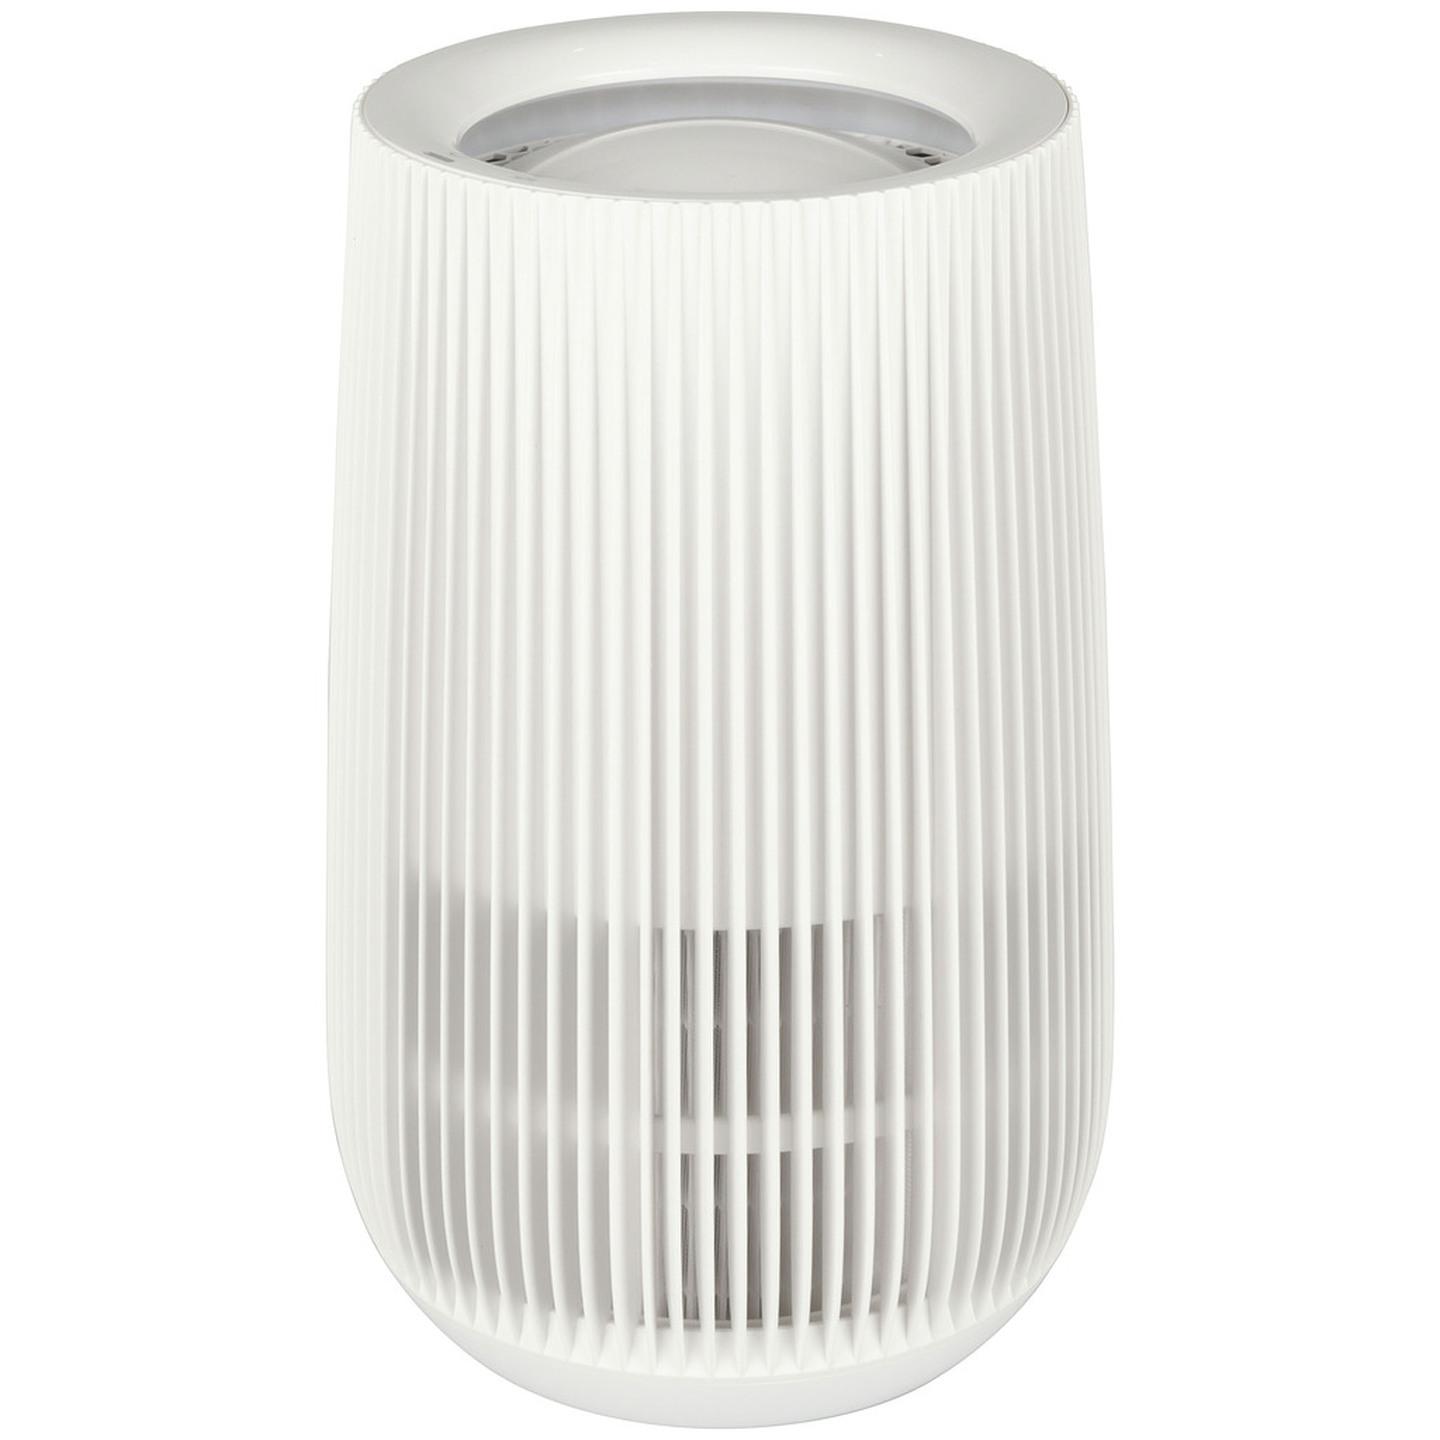 Air Purifier with LED Light